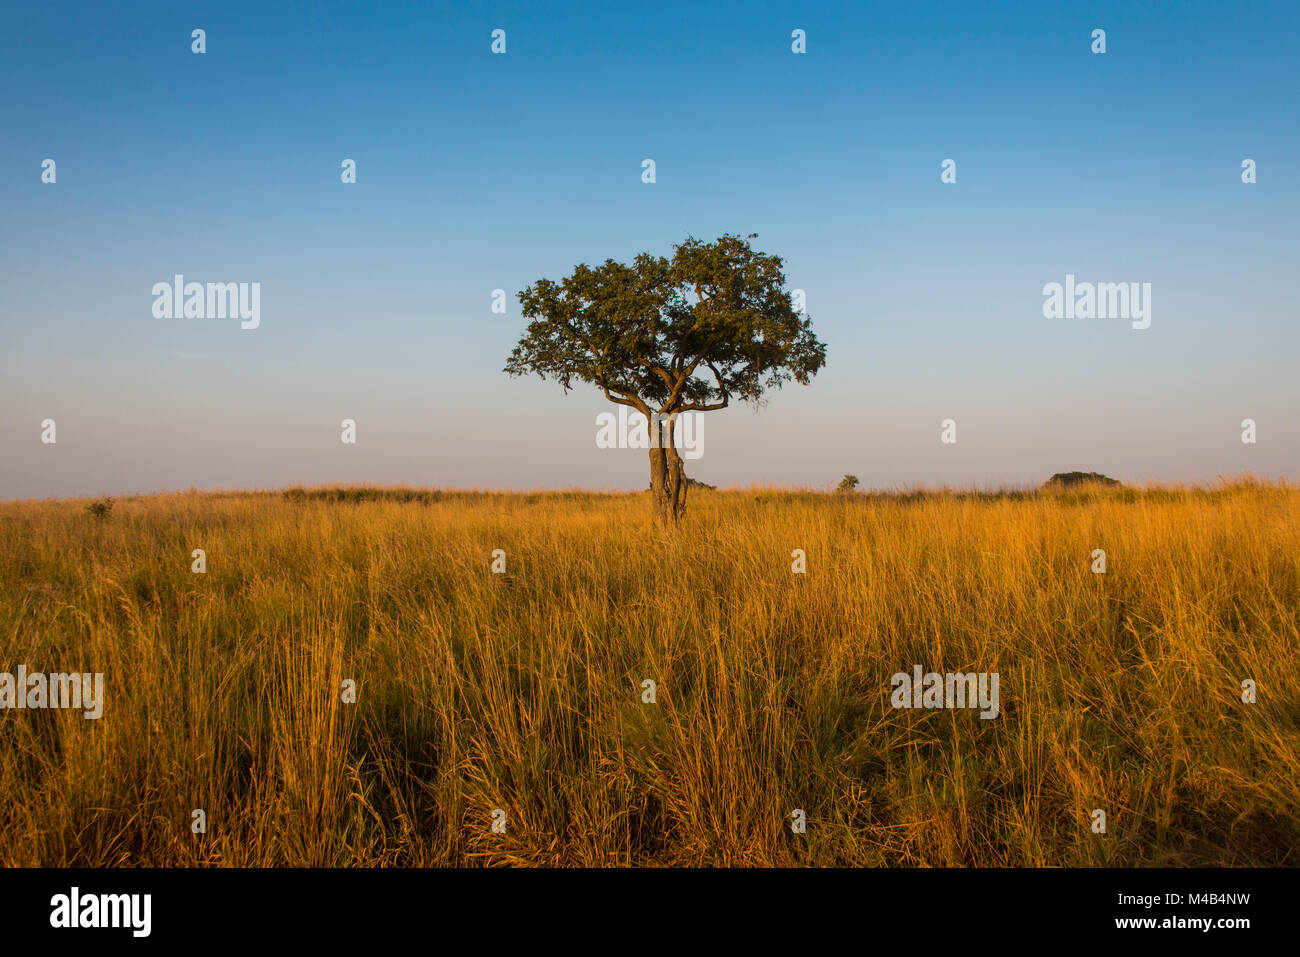 Lonely tree in the Savannah of the Murchison Falls National Park,Uganda,Africa Stock Photo